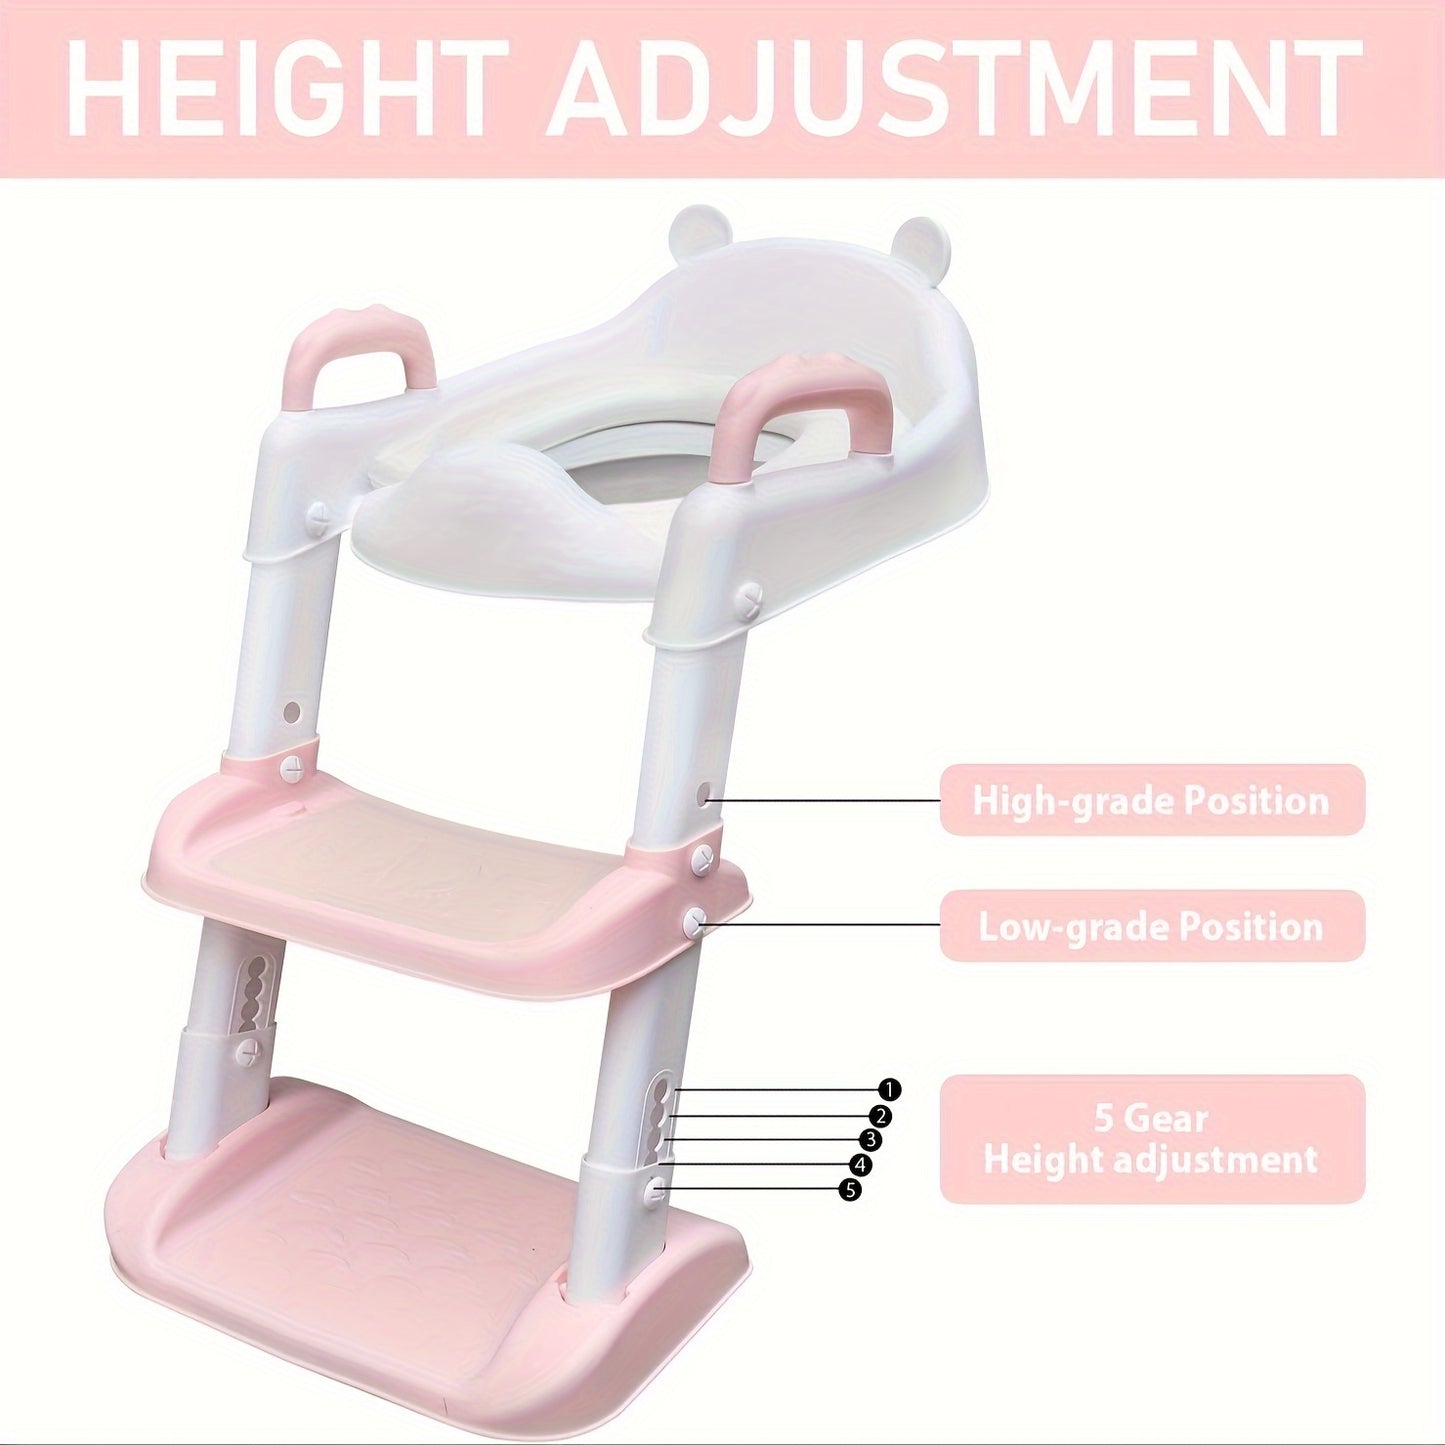 1pc Potty Training Seat With Step Stool Ladder, Anti-Slip And Detachable Soft Pad, Toilet Training Seat With Height Adjustable Wide Steps And Safety Handles, Pink